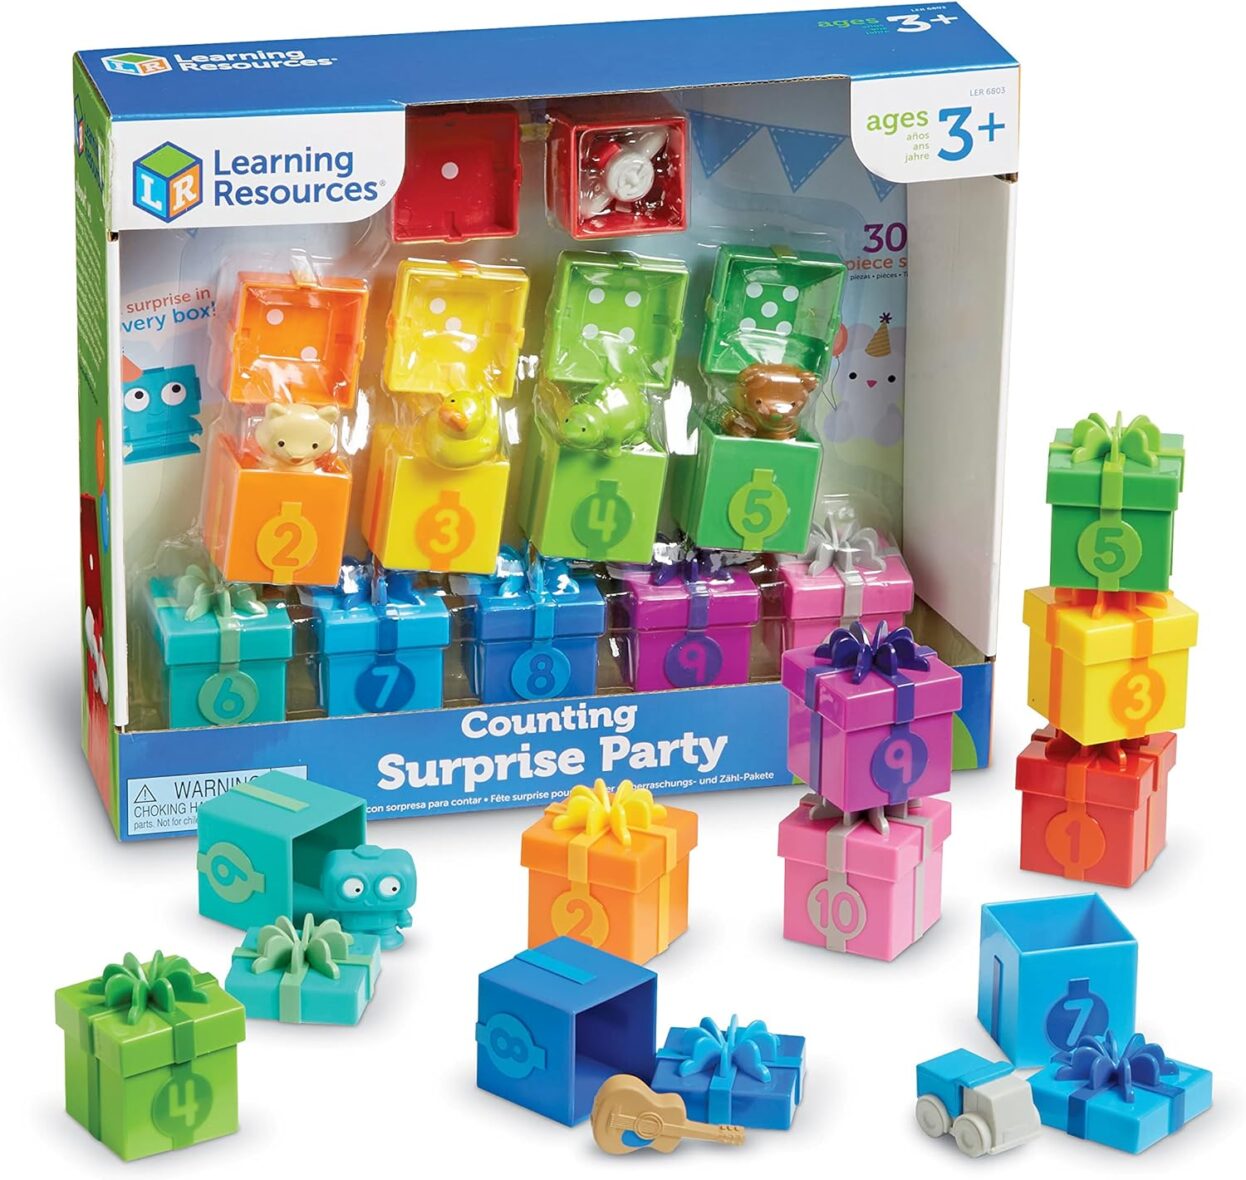 Learning Resources Counting Surprise Party, Homeschool, Fine Motor, Counting & Sorting Toy, Ages 3+ Ms Rachel toy